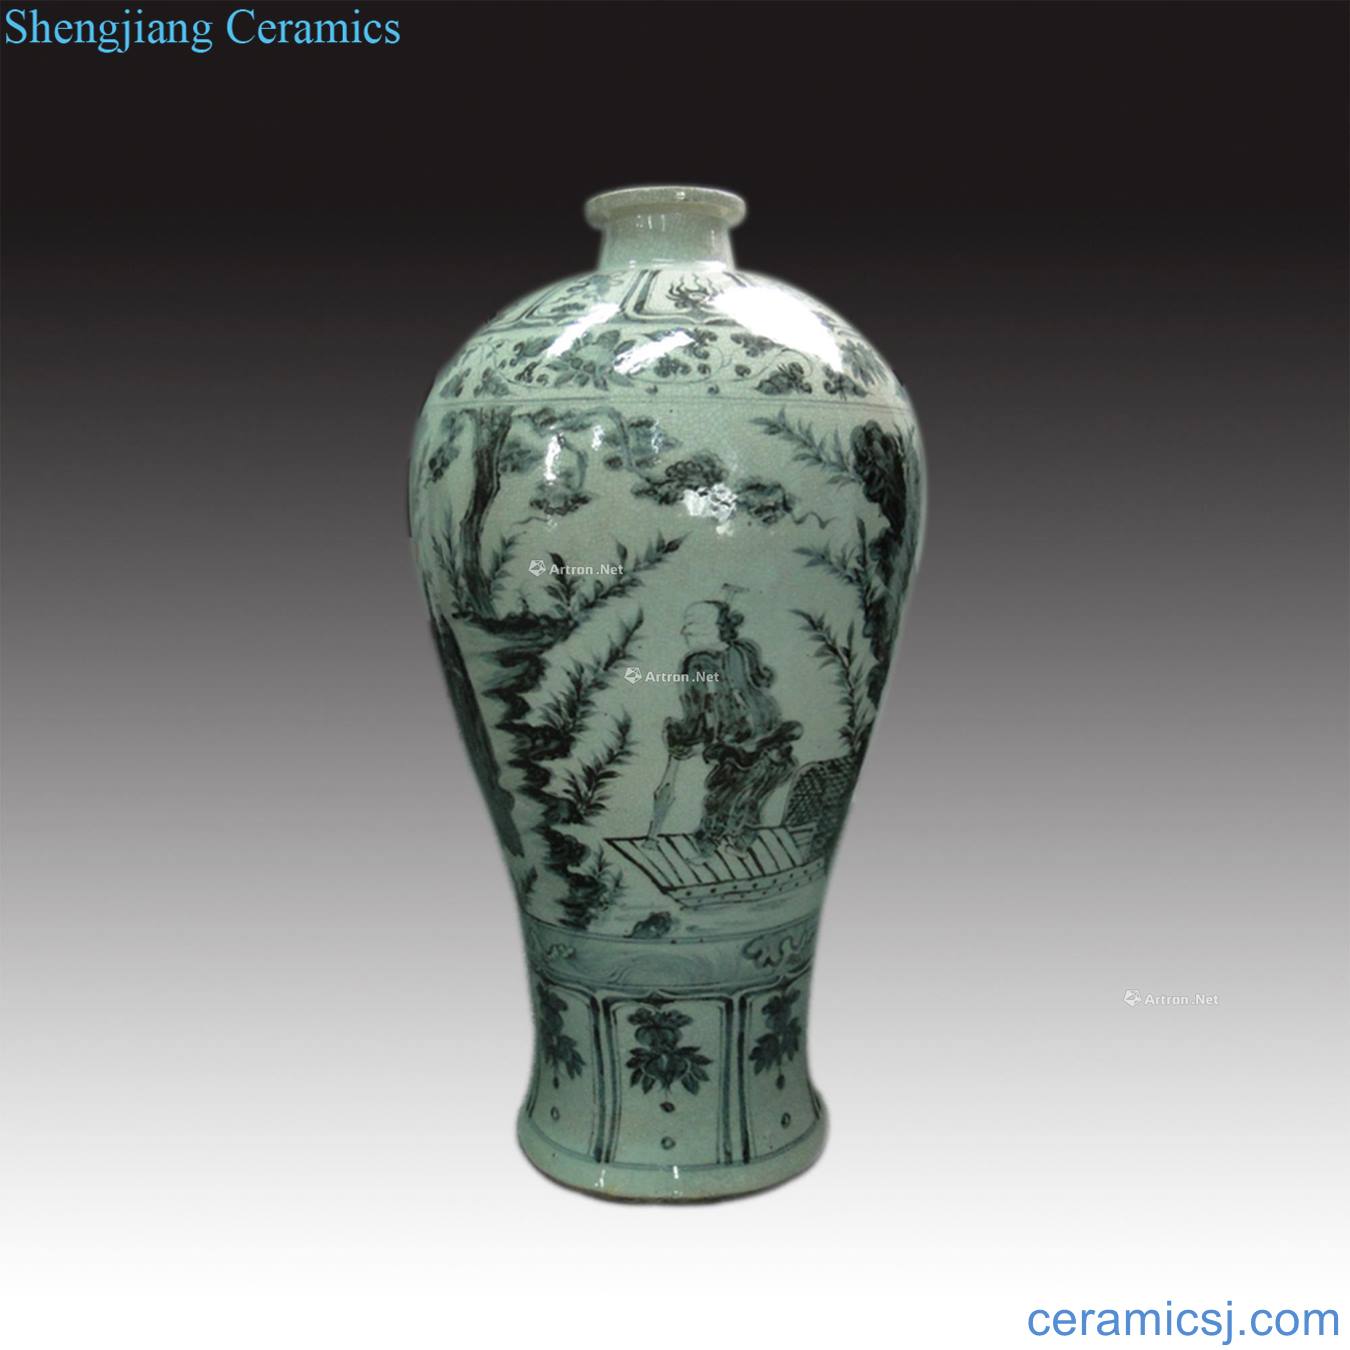 The yuan dynasty Main day after han xin blue plum bottle